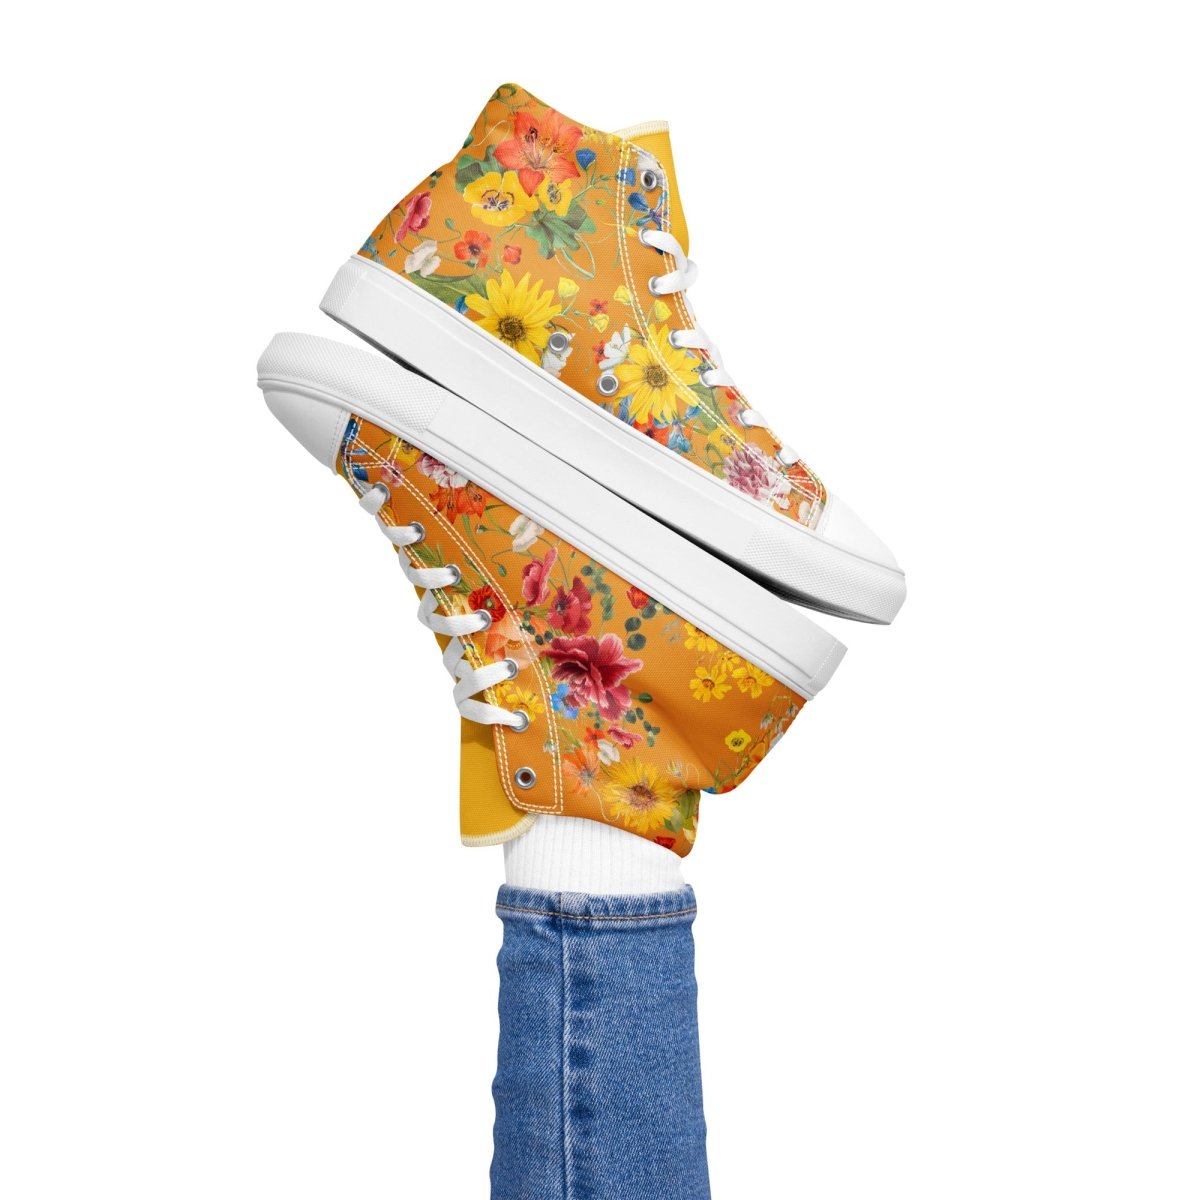 Women's Yellow Floral Sneakers - DoggyLoveandMore